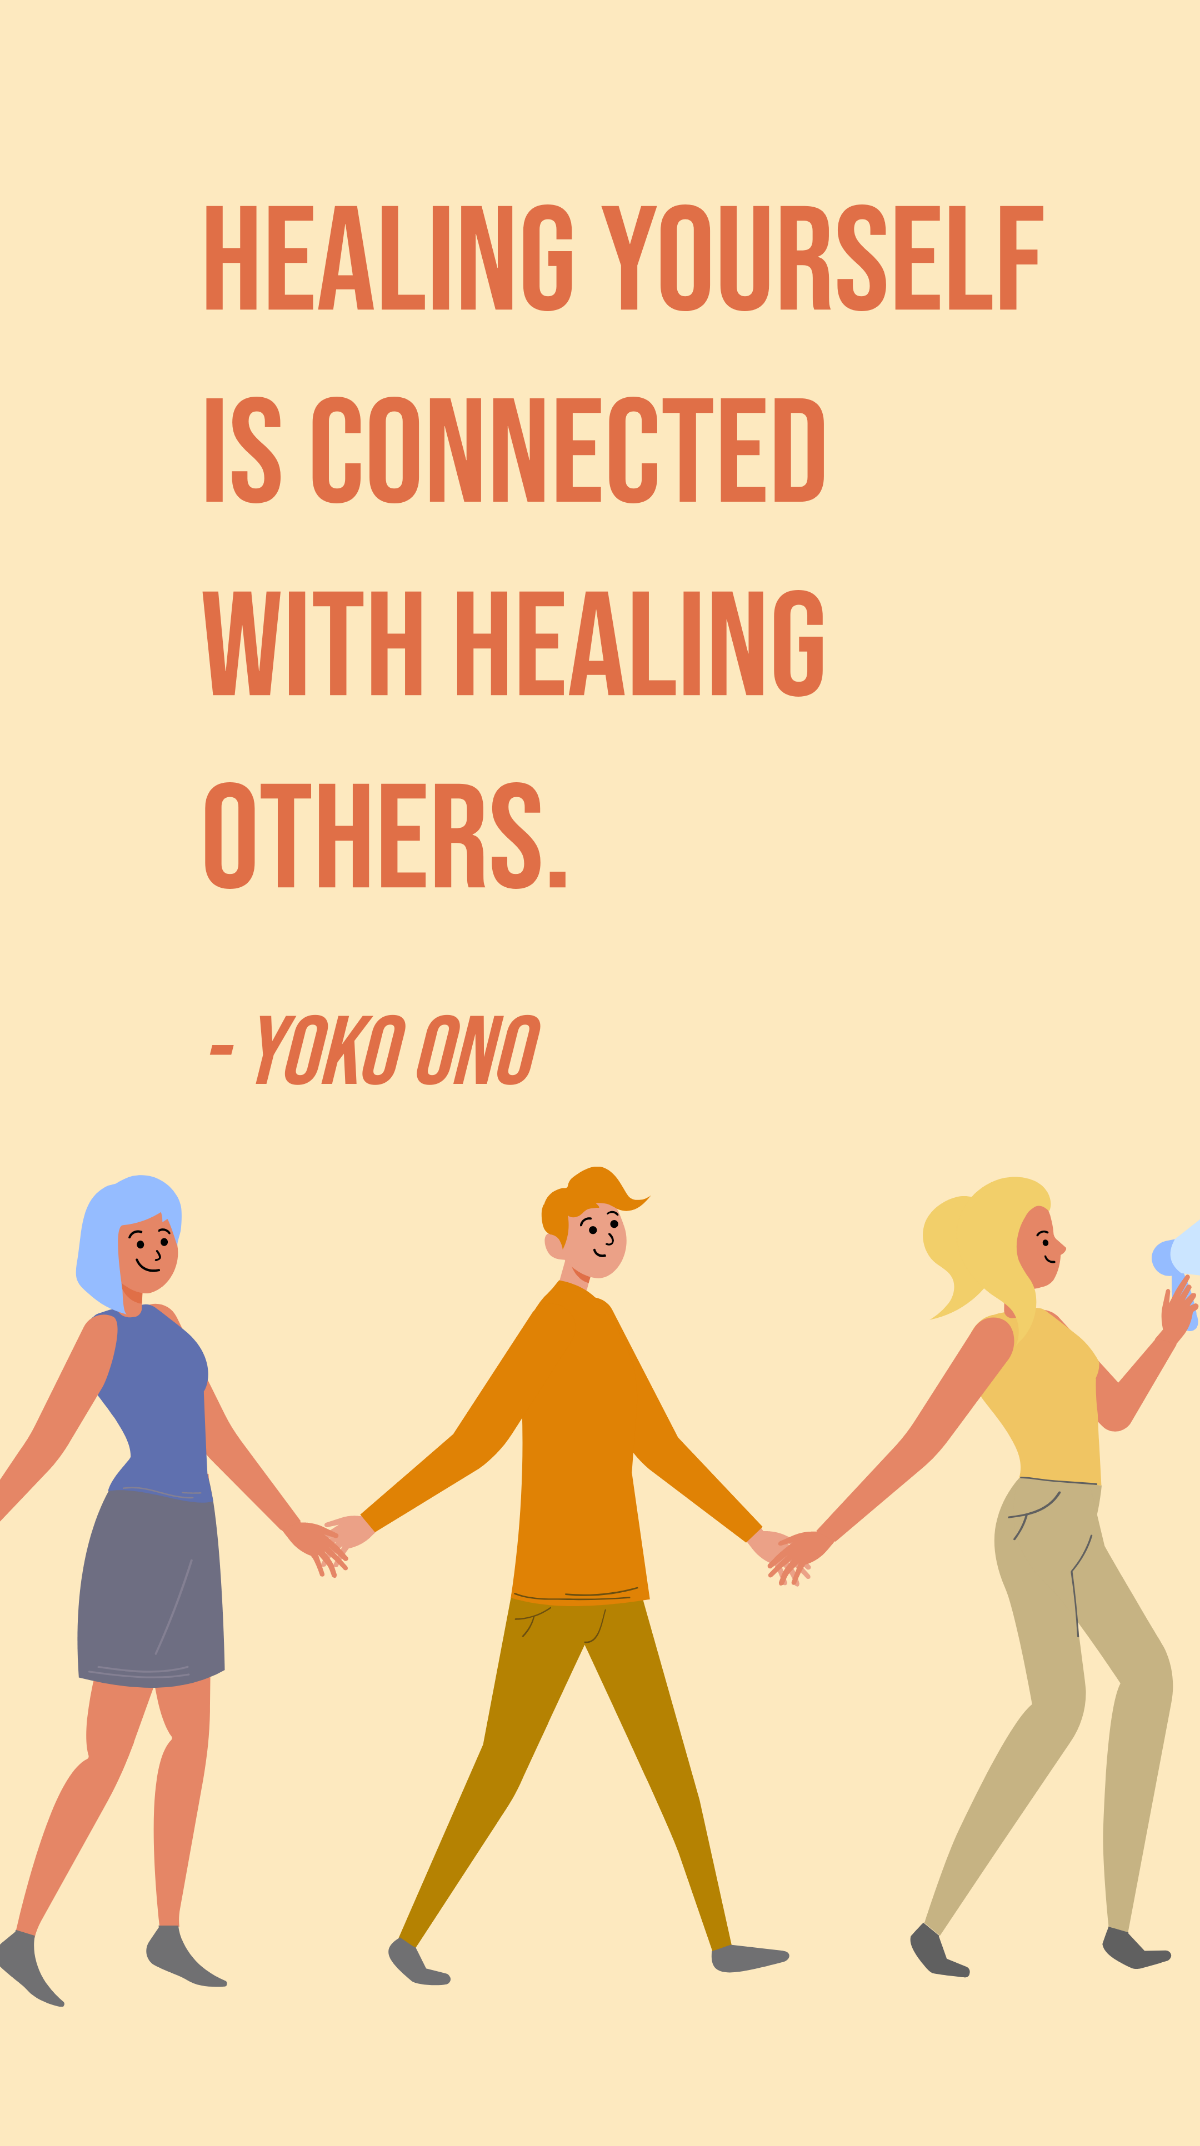 Yoko Ono - Healing yourself is connected with healing others.